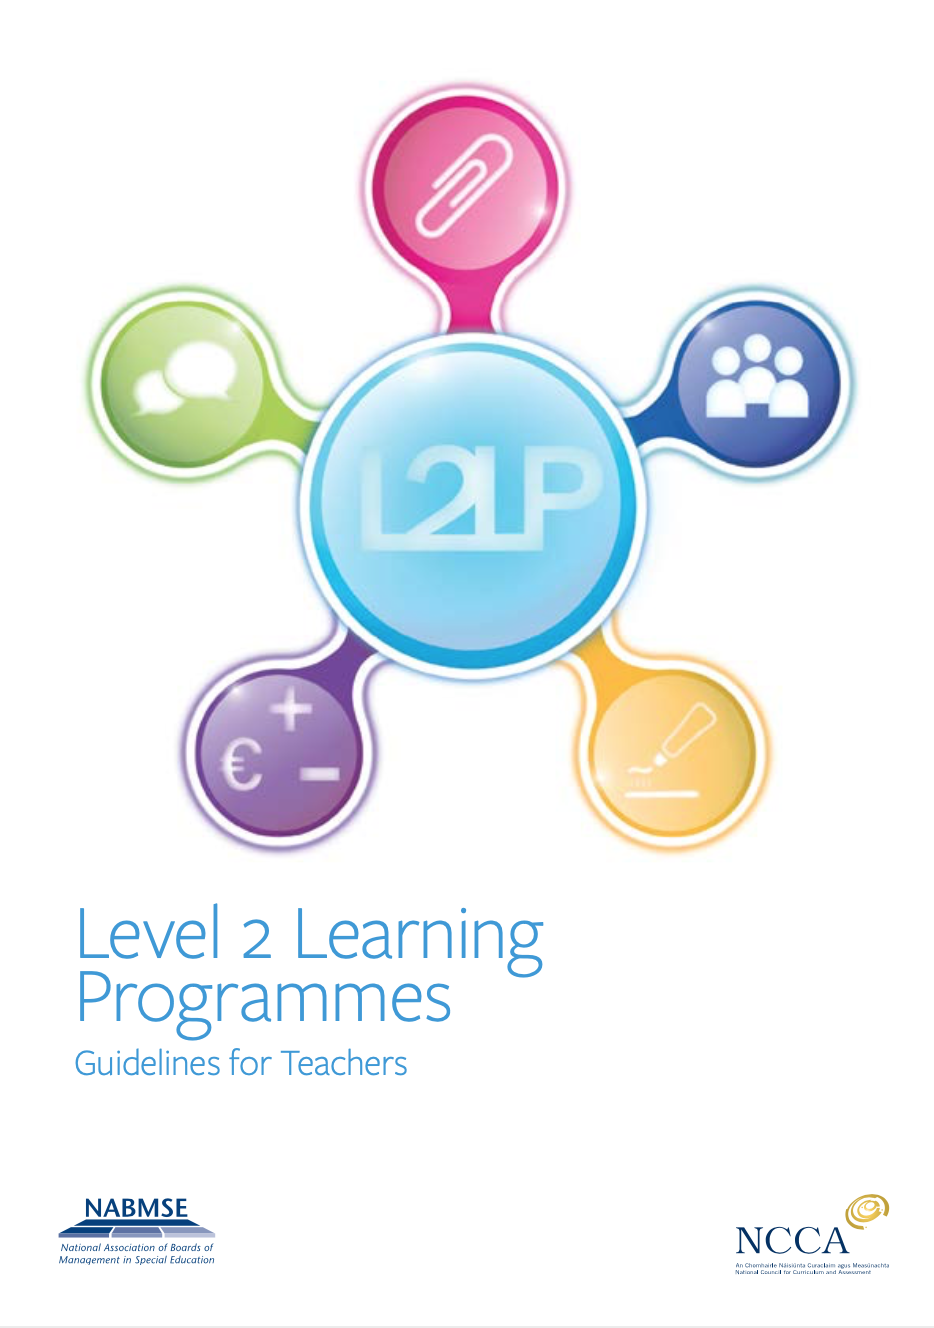 Level 2 Learning Programmes (L2LPs)